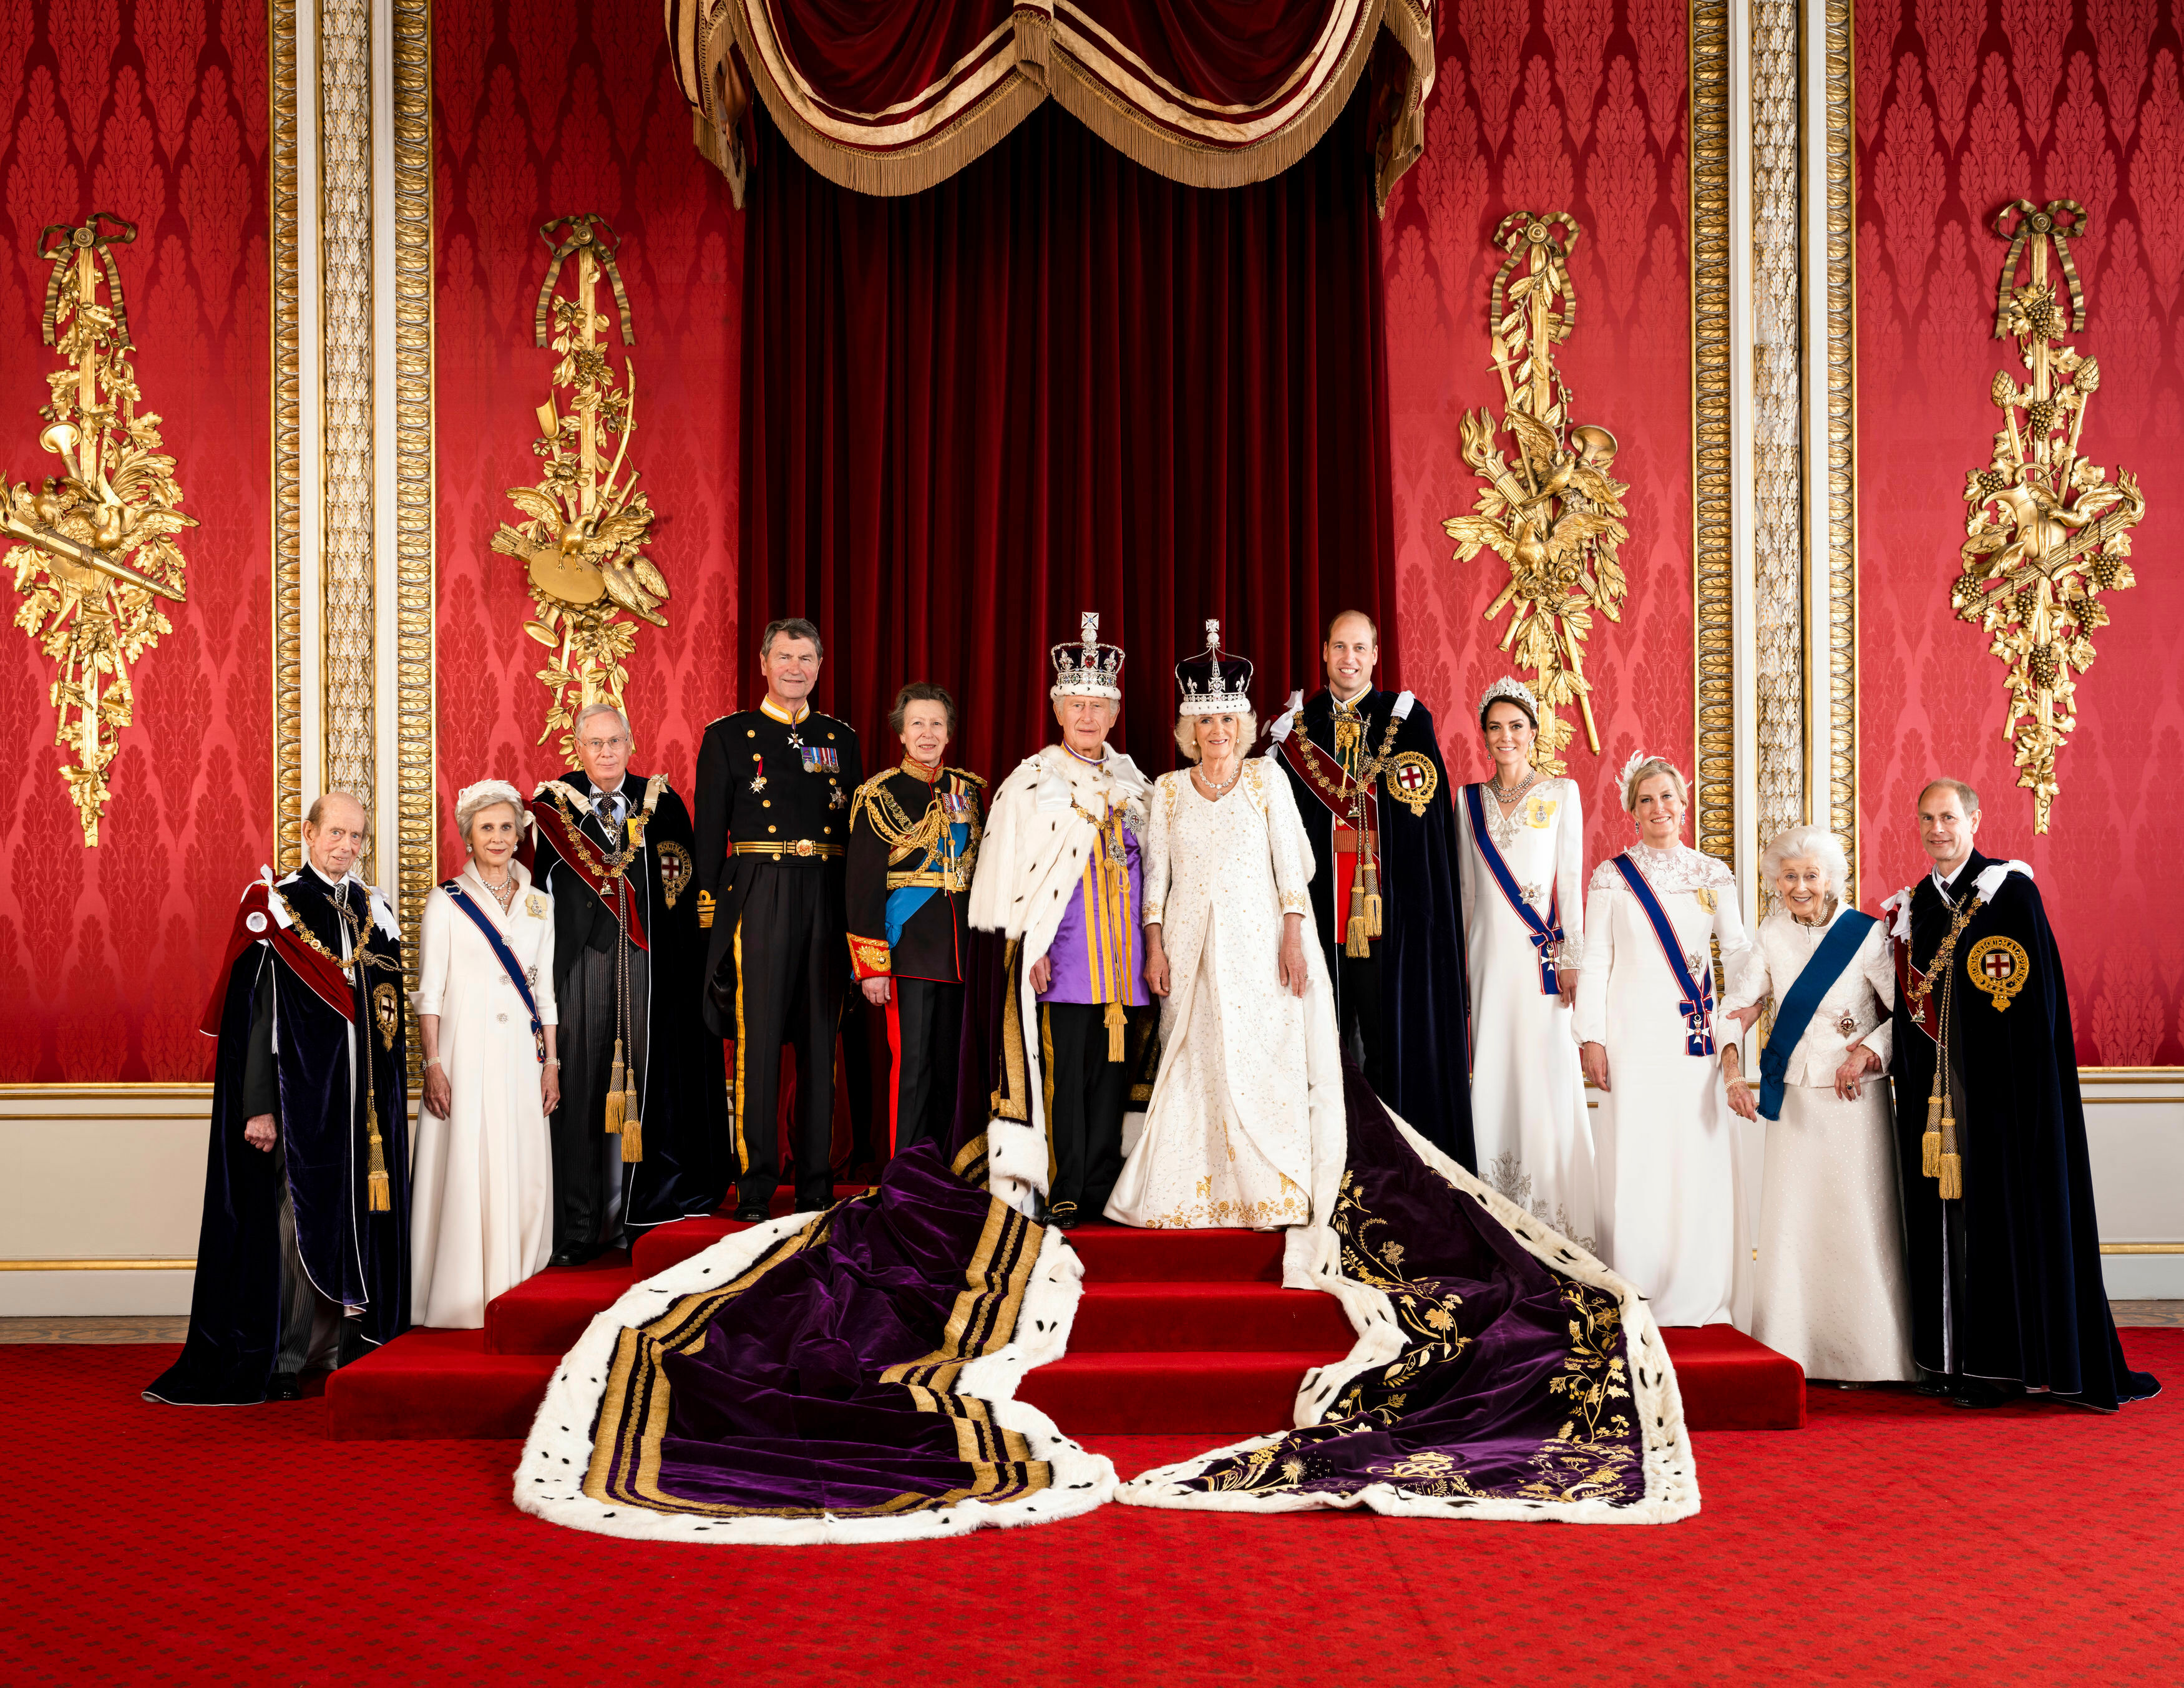 <p>King Charles III and Queen Camilla are pictured with members of the working royal family in one of their four official <a href="https://www.wonderwall.com/celebrity/the-coronation-of-king-charles-iii-and-queen-camilla-the-best-pictures-of-all-the-royals-at-this-historic-event-735015.gallery">coronation</a> portraits released on May 8, 2023: (from left) Prince Edward, the Duke of Kent; Birgitte, the Duchess of Gloucester; Prince Richard, the Duke of Gloucester; Vice Admiral Sir Tim Laurence; Princess Anne; King Charles III; Queen Camilla; <a href="https://www.wonderwall.com/celebrity/profiles/overview/prince-william-482.article">Prince William</a>, the Prince of Wales; Princess Kate, the Princess of Wales; Sophie, Duchess of Edinburgh; Princess Alexandra, the Honourable Lady Ogilvy; Prince Edward, the Duke of Edinburgh.</p>